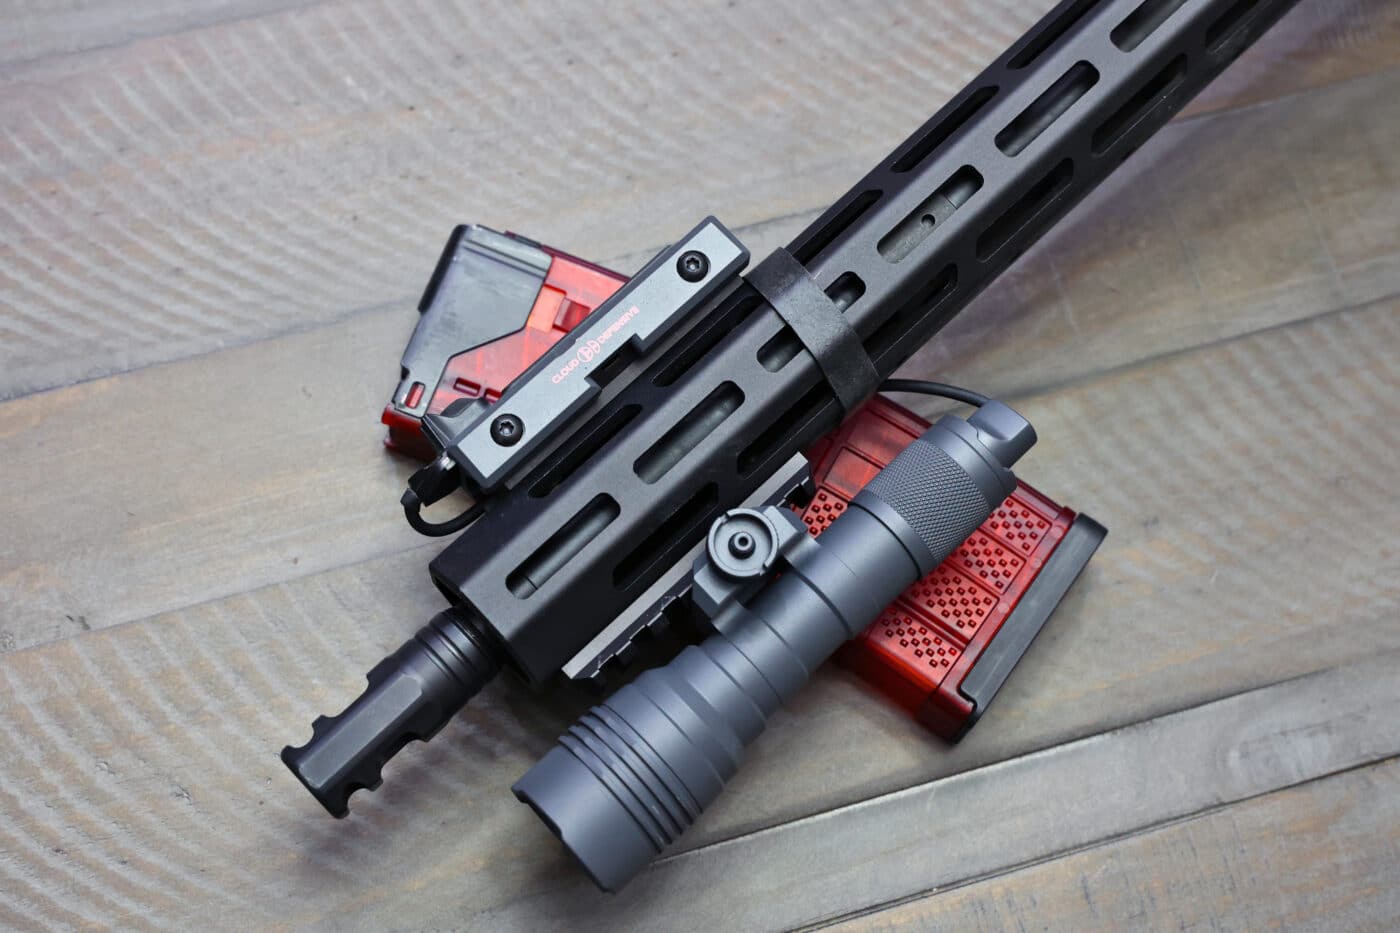 Streamlight HLX and Cloud Defensive LCS mounted on a SAINT rifle